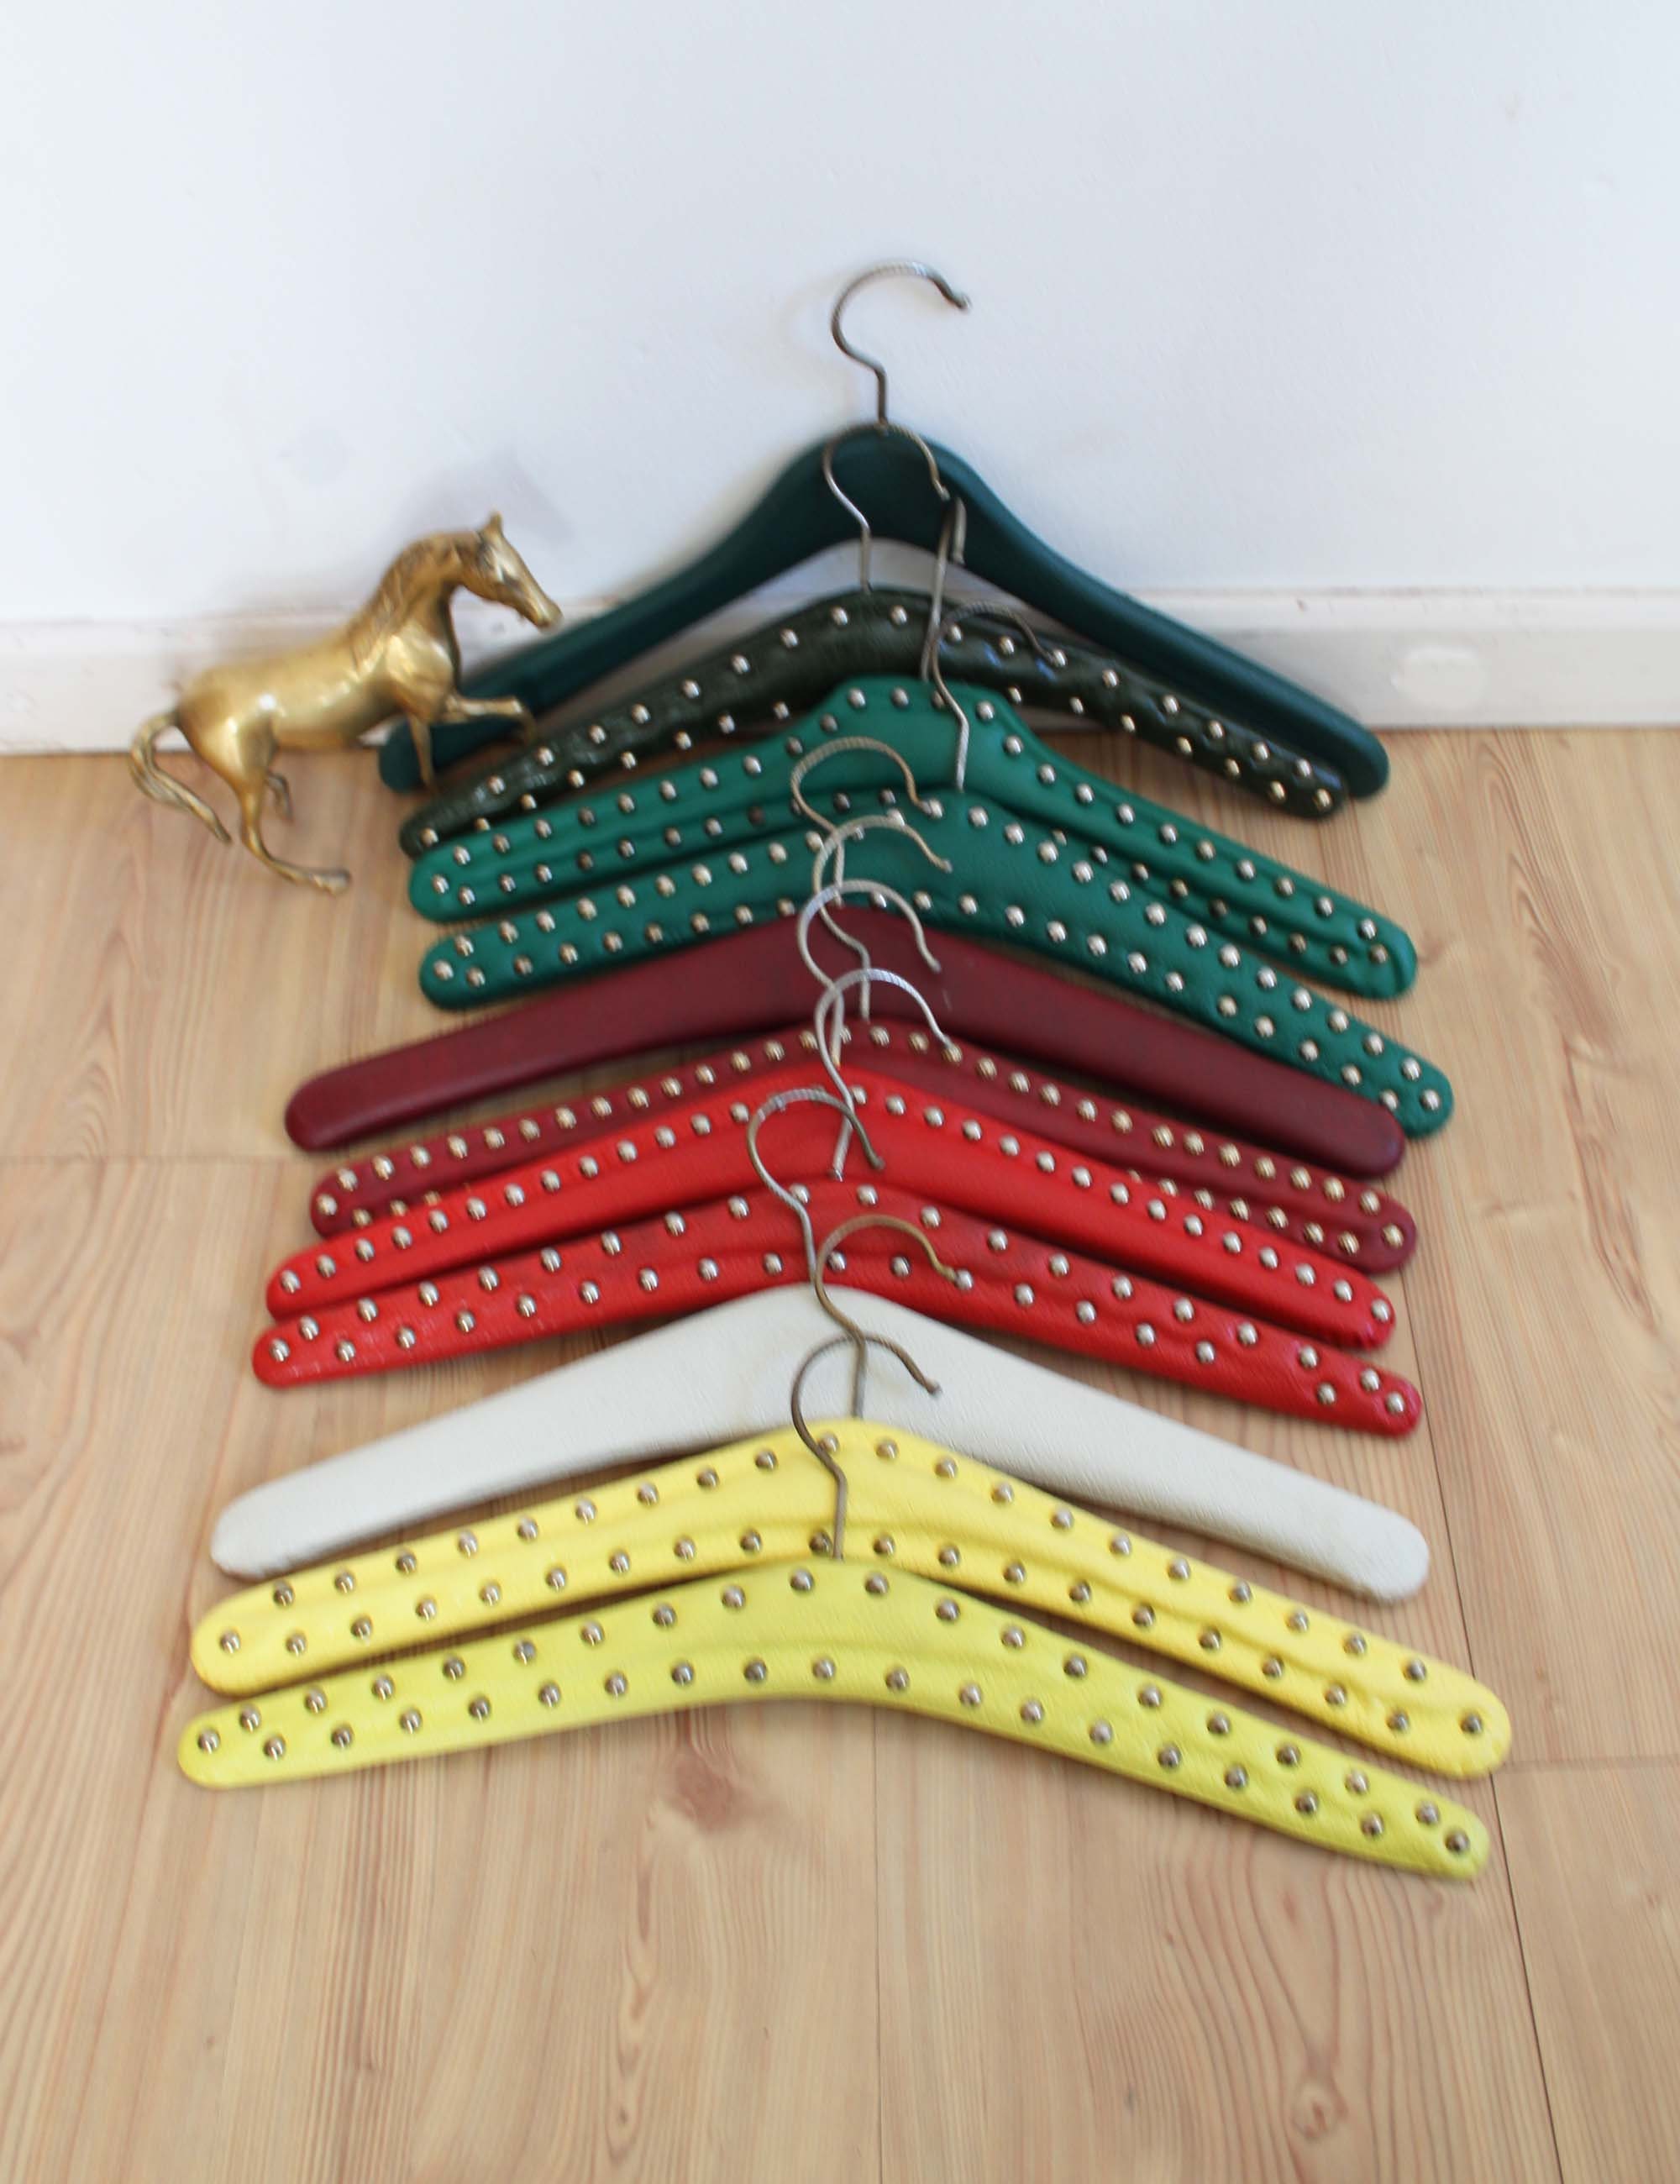 Leather Straps for Clothes Hanging, Wooden Curtain Rod Holder